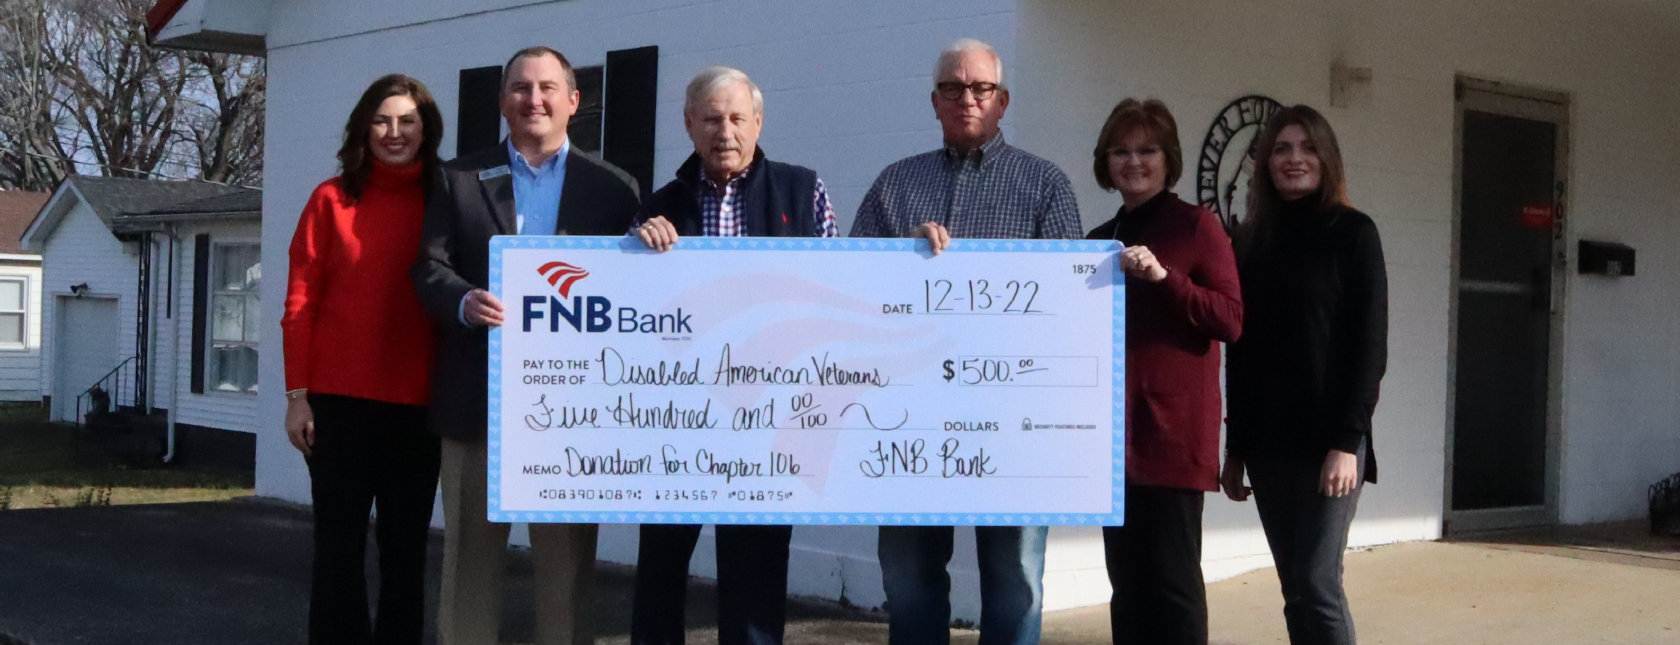 FNB Makes $500 donation to Disabled American Veterans